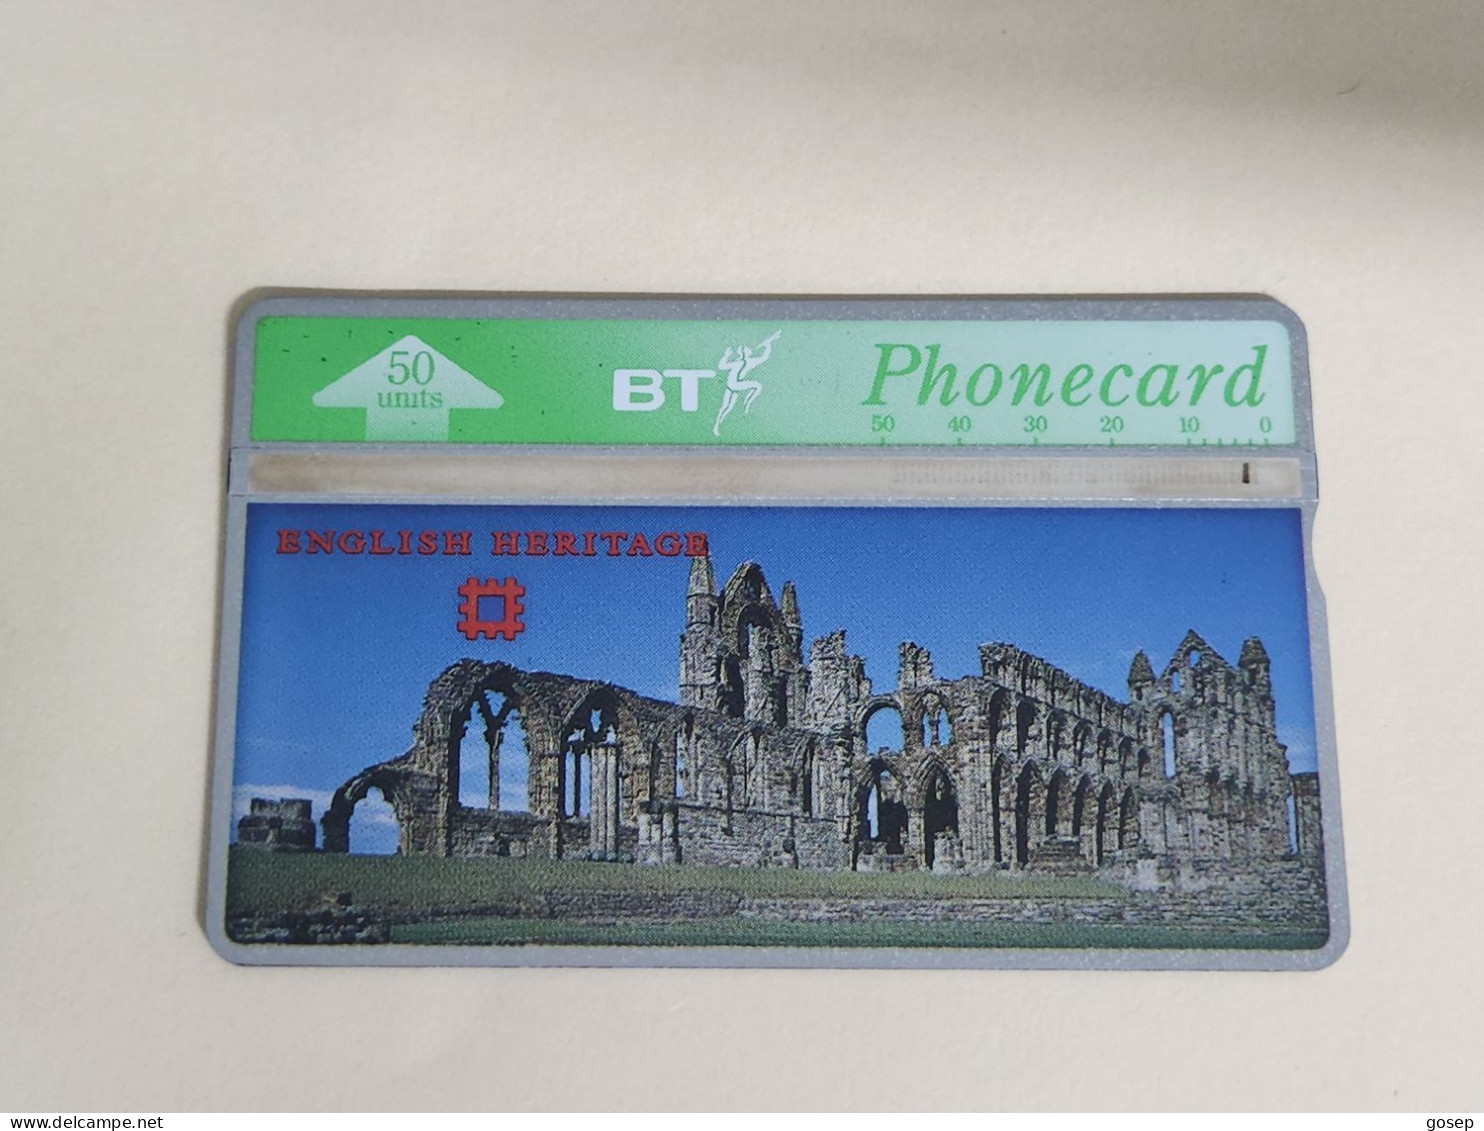 United Kingdom-(BTA112)-HERITAGE-Whitby Abbey-(192)(50units)(547A70177)price Cataloge3.00£-used+1card Prepiad Free - BT Emissions Publicitaires